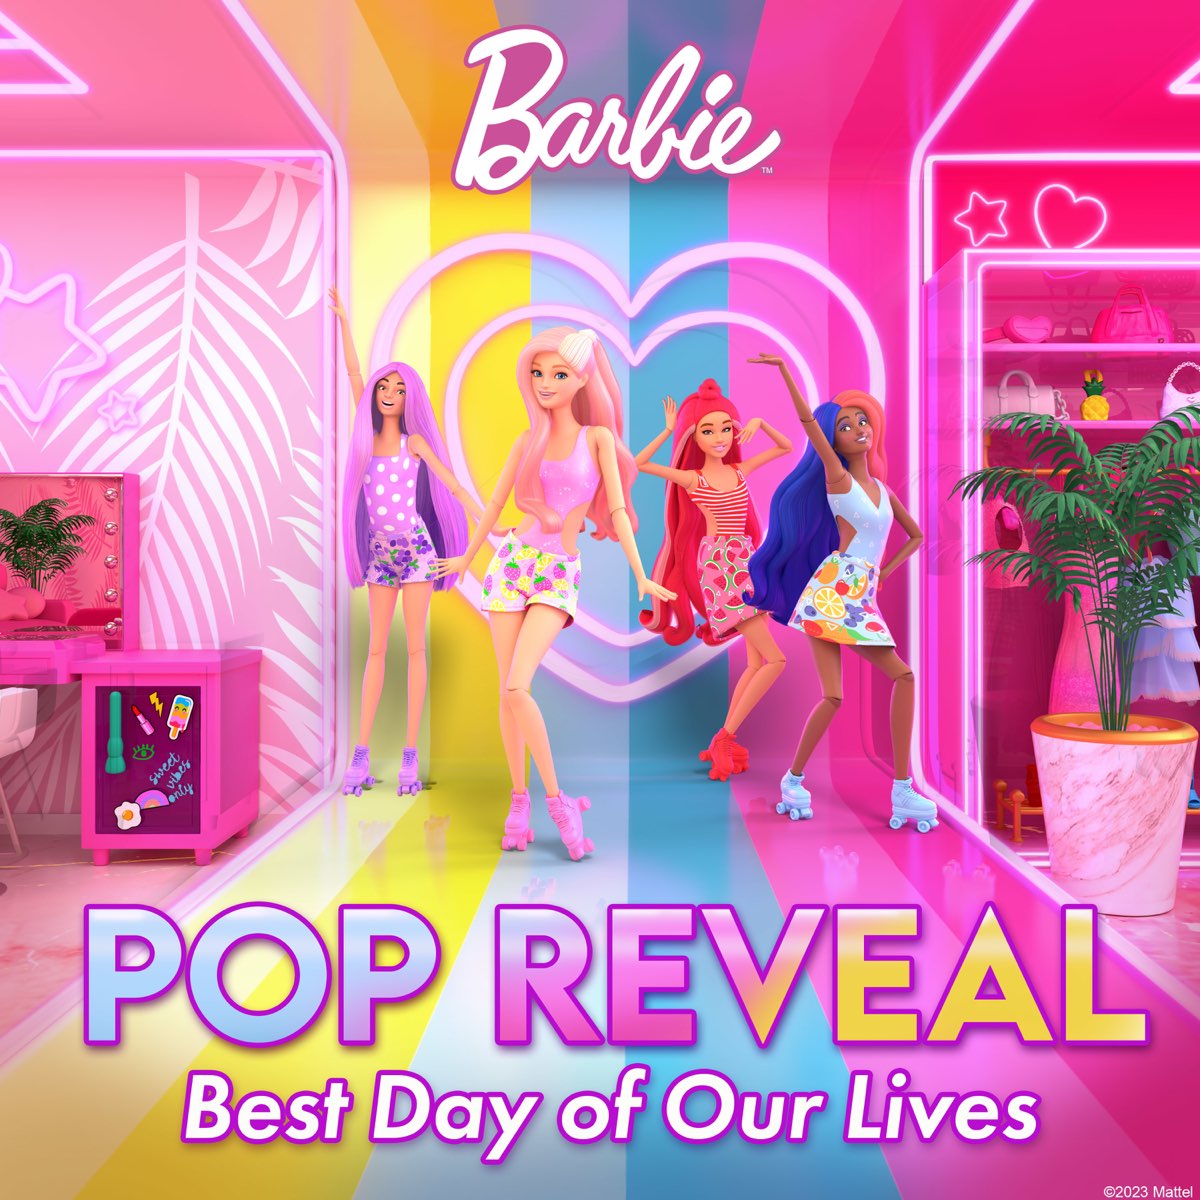 POP Reveal (Best Day of Our Lives) - Single - Album by Barbie - Apple Music